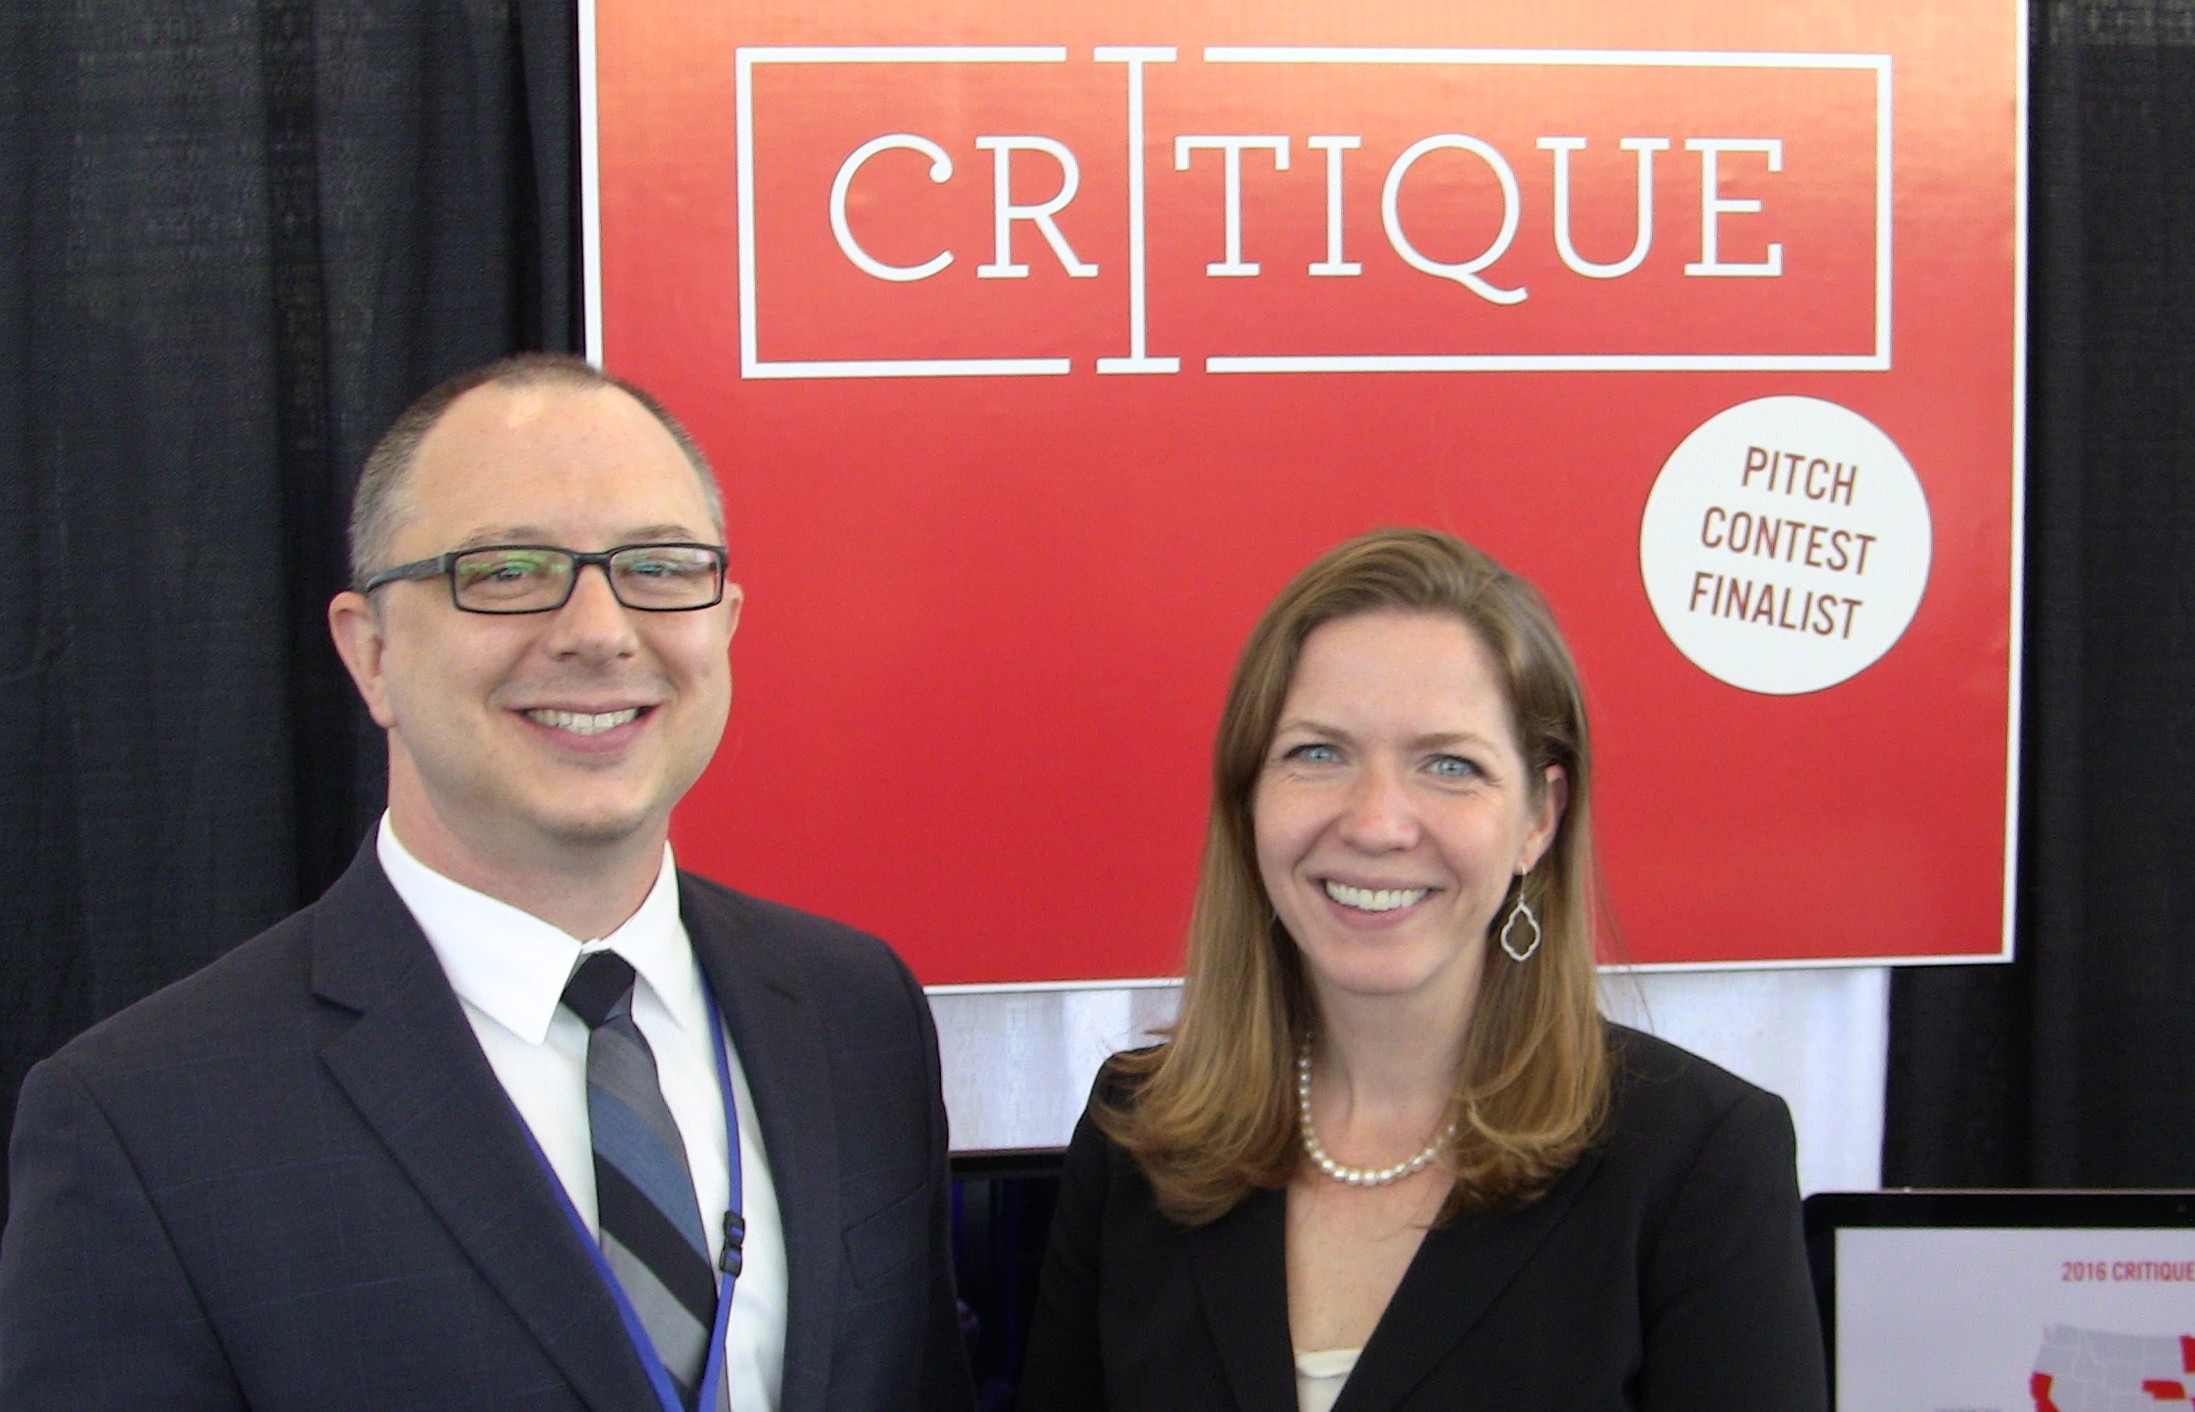 Co-founders Matthew Callison and Tiffany Roman of Critique.